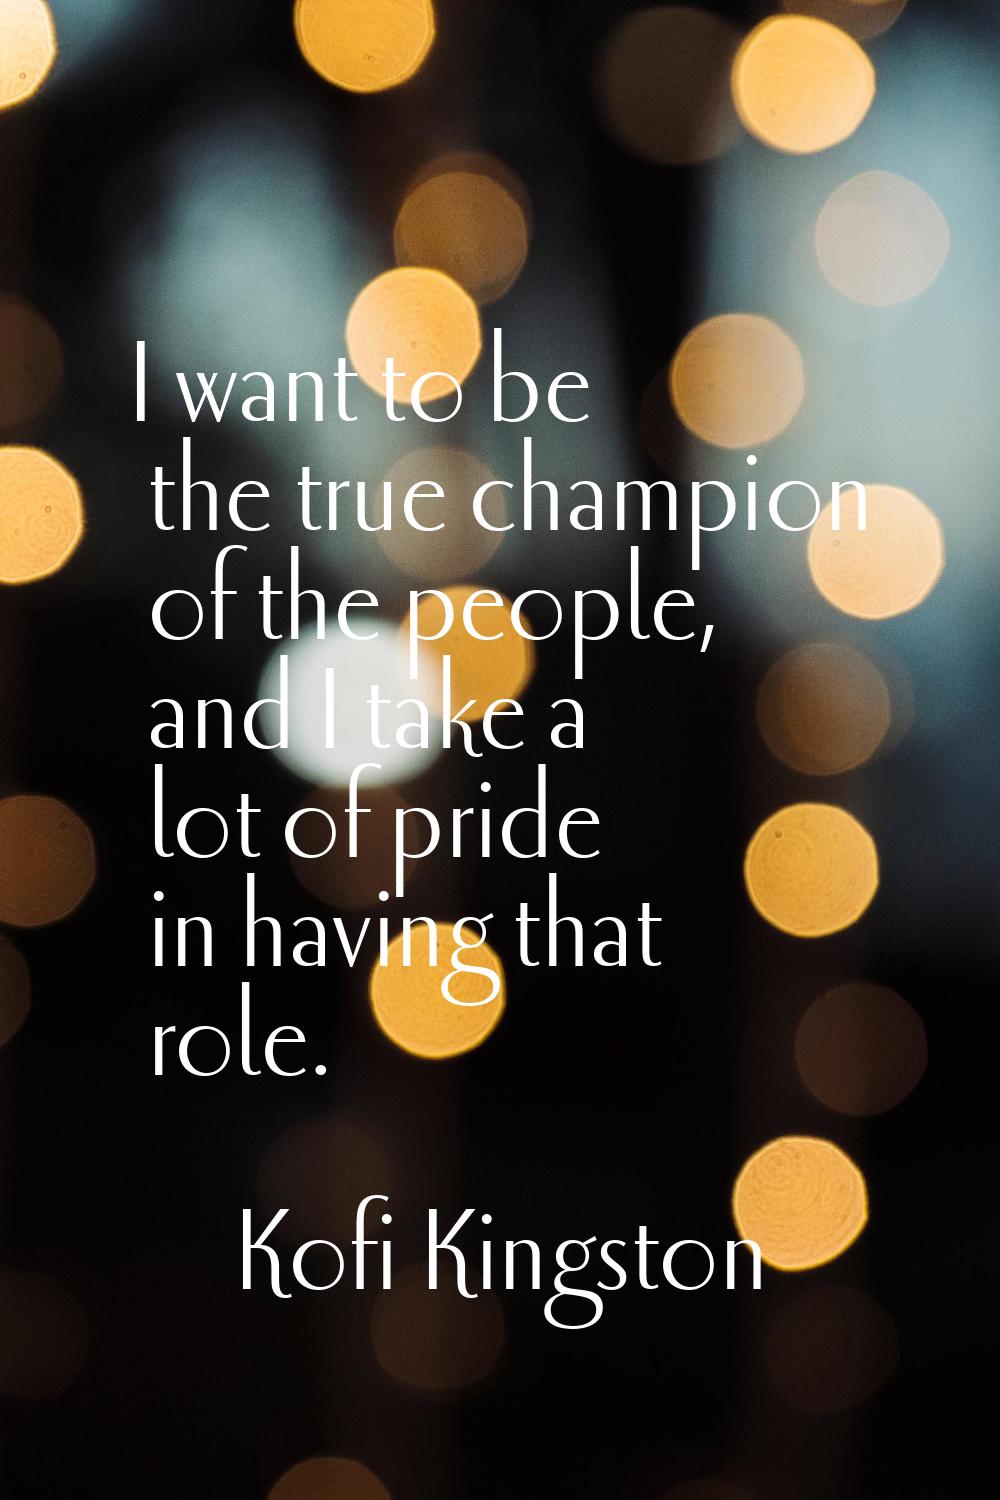 I want to be the true champion of the people, and I take a lot of pride in having that role.